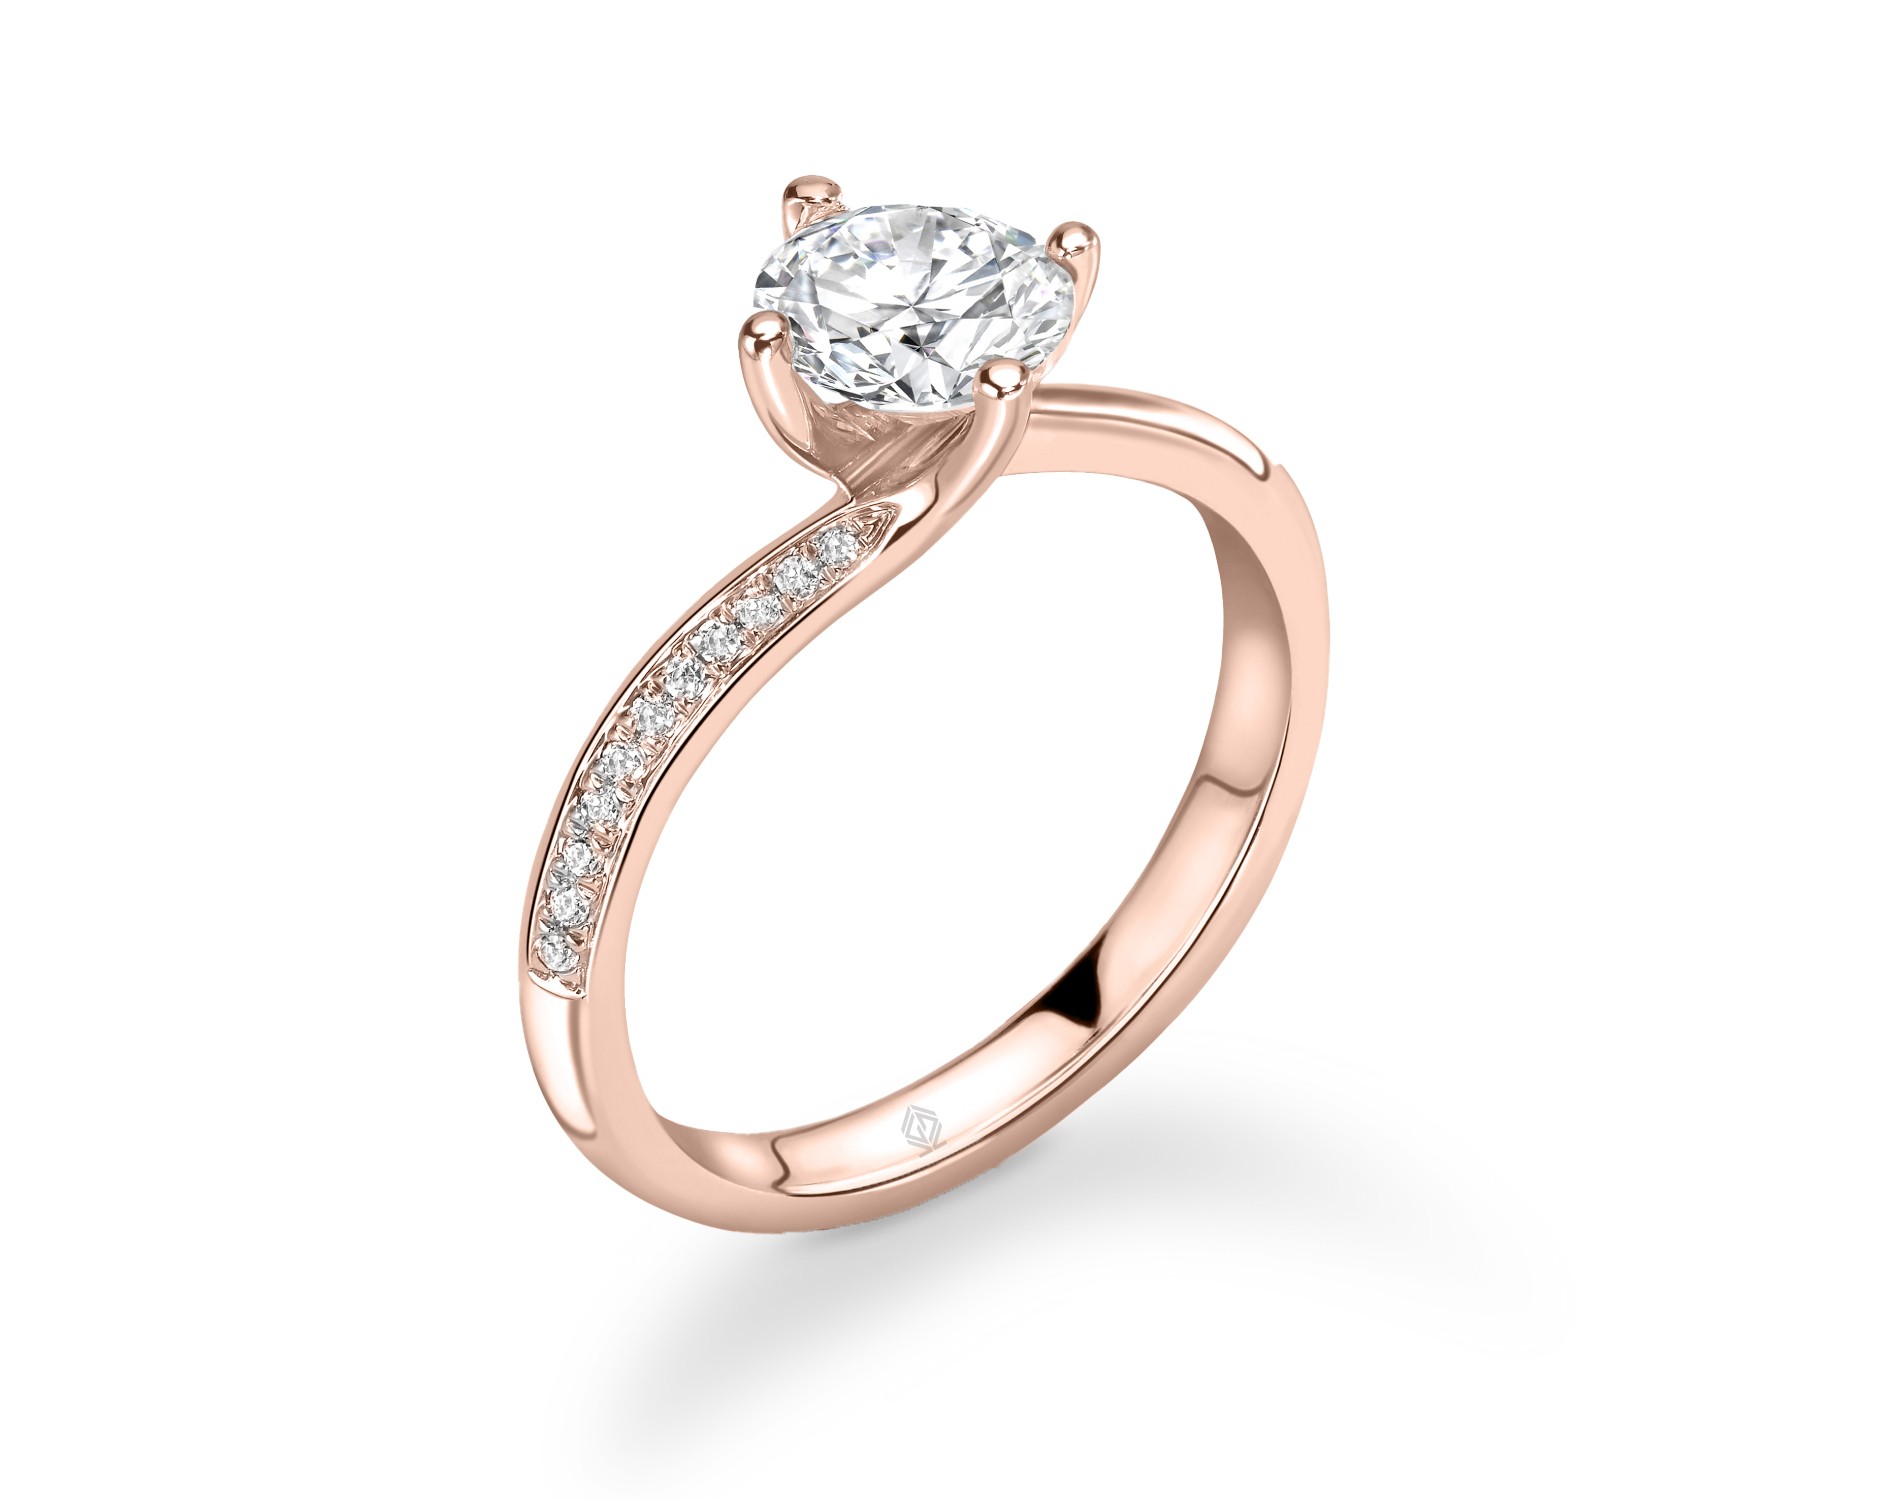 18K ROSE GOLD ROUND CUT 4 PRONG TWIST DIAMOND ENGAGEMENT RING WITH SIDE STONES